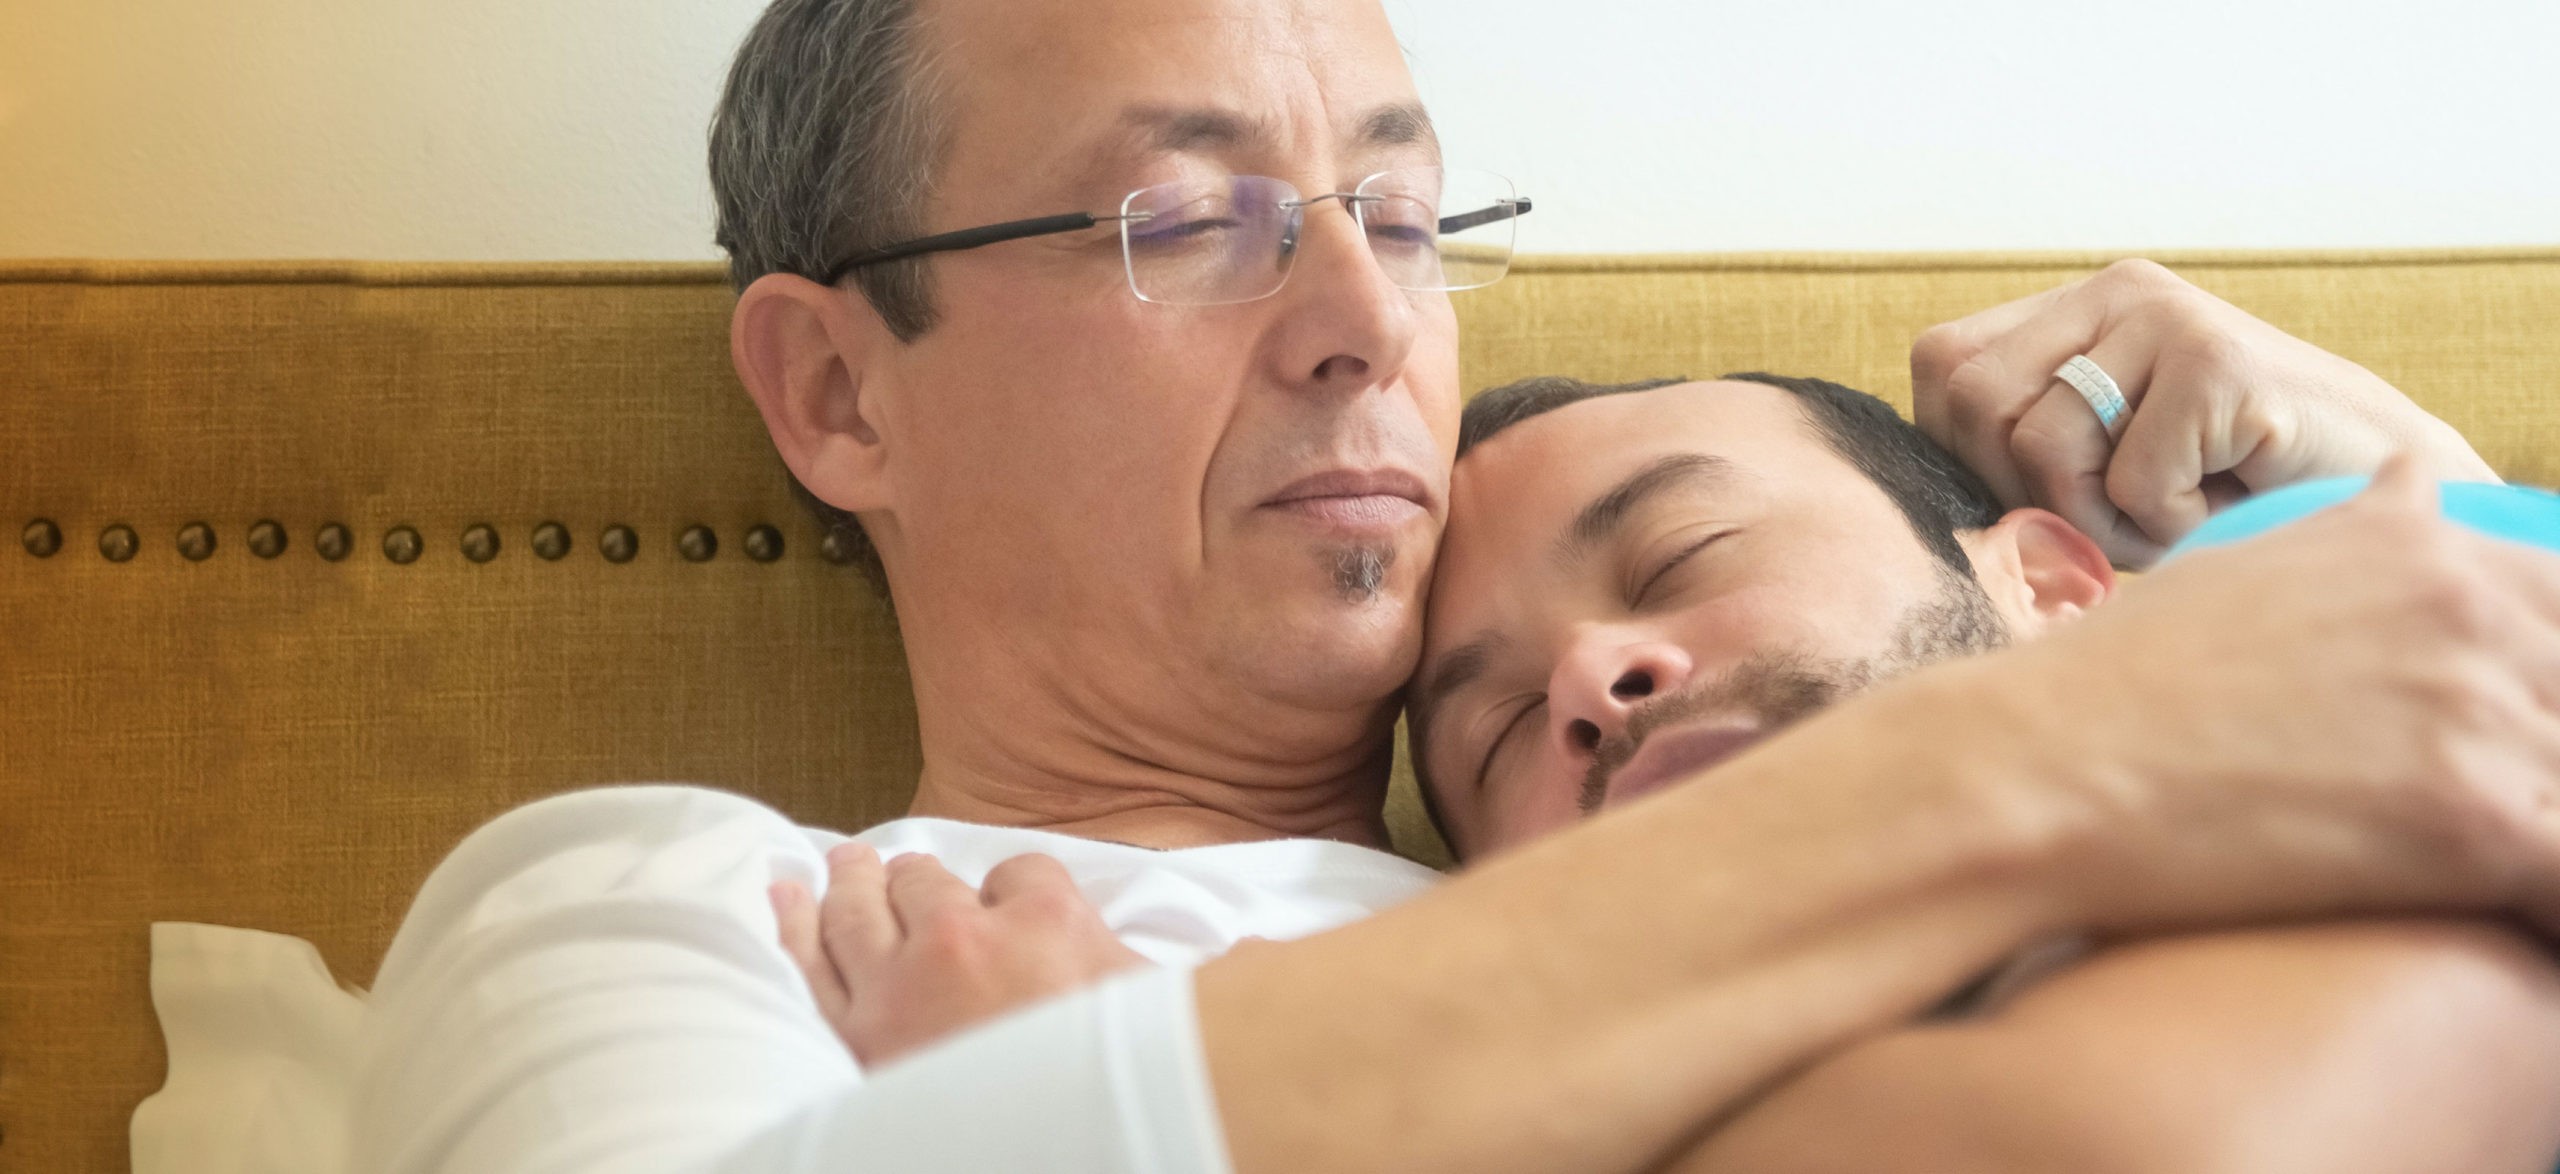 Two men embrace in a bed